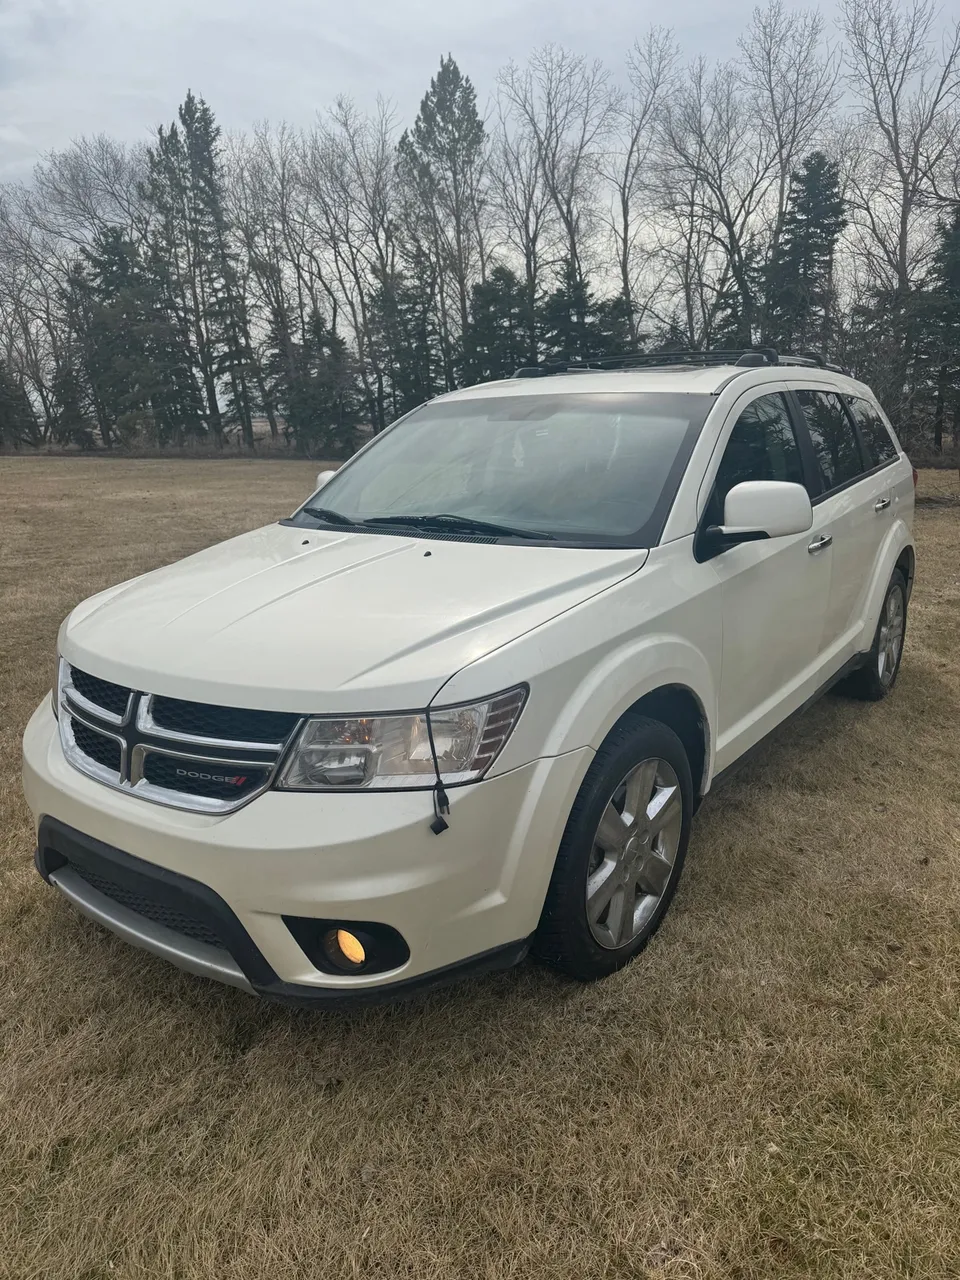 2013 DODGE JOURNEY AWD CLEAN TITLE SAFETIED $10,850